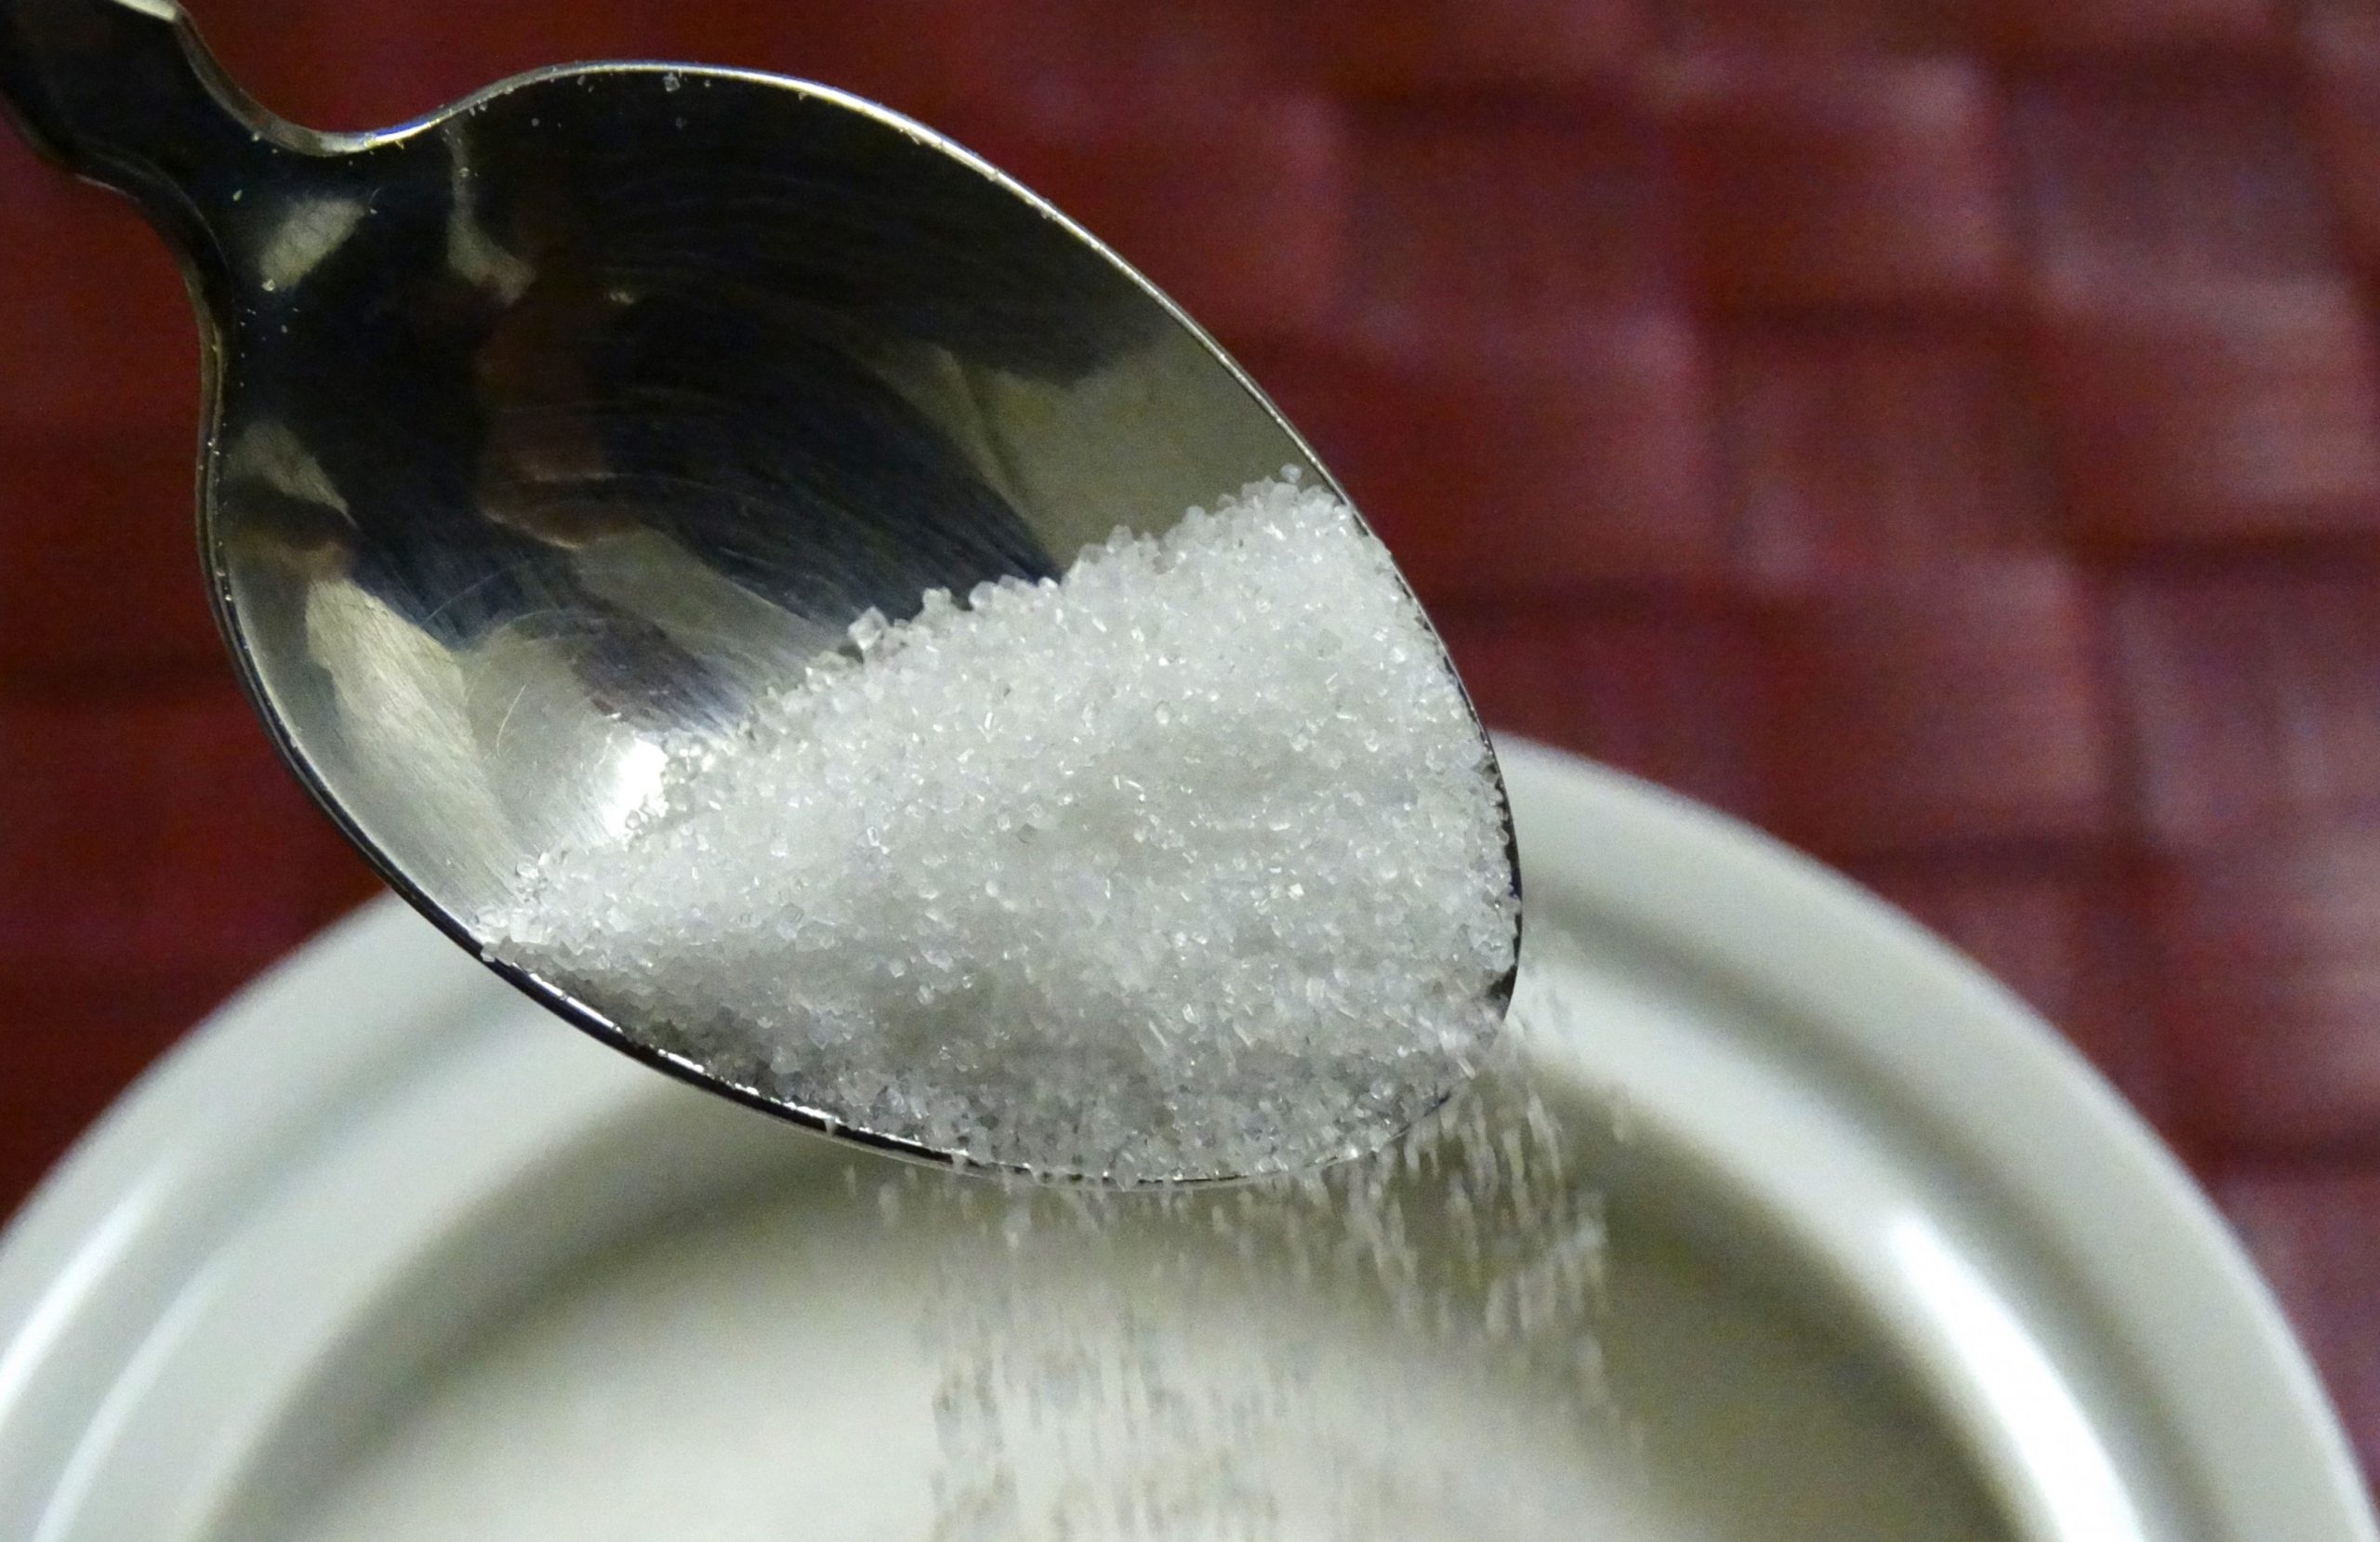 Sugar Was Linked To Heart Disease 50 Years Ago, But The Industry Covered It Up